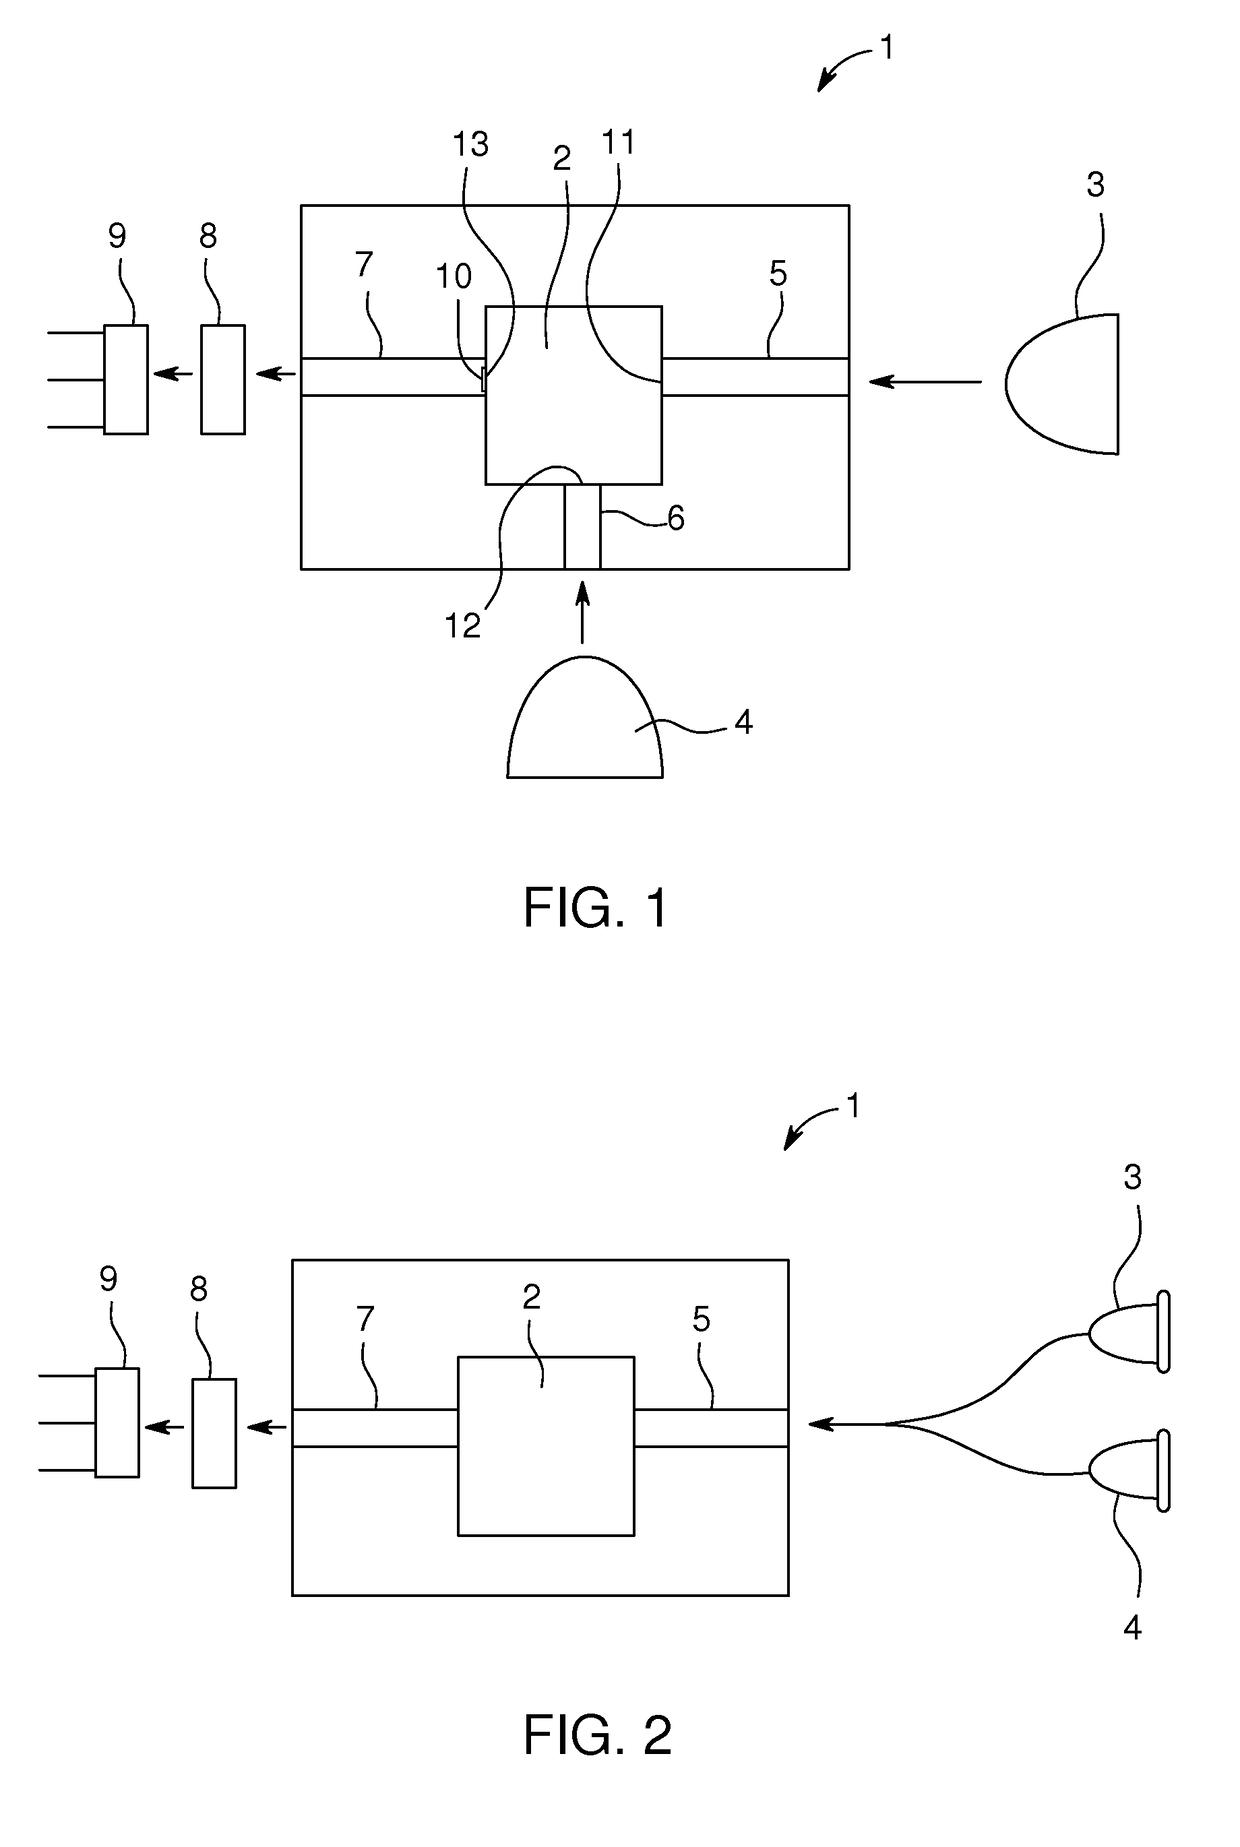 Intergration of Fluorescence Detection Capability into Light Absorbance Measurement Apparatus